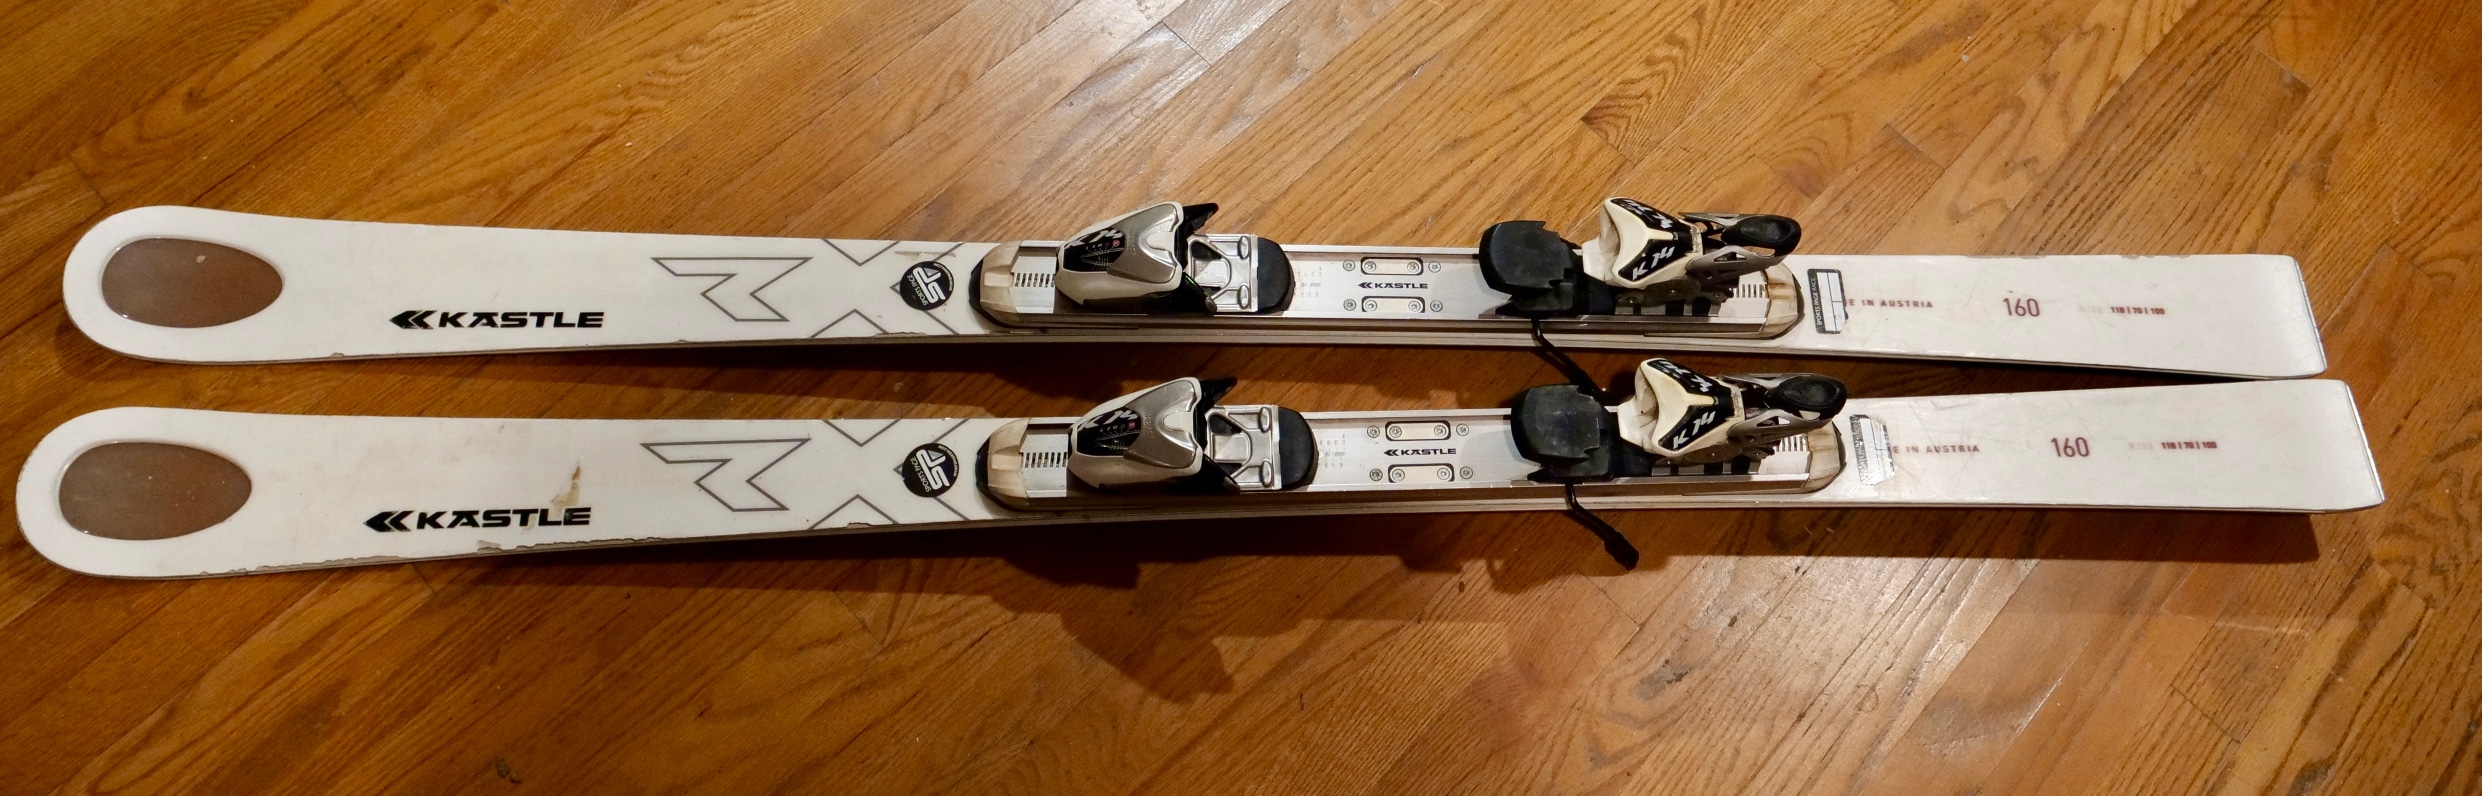 Used Unisex Kastle 160 cm All Mountain rx Skis With Bindings Max Din 14